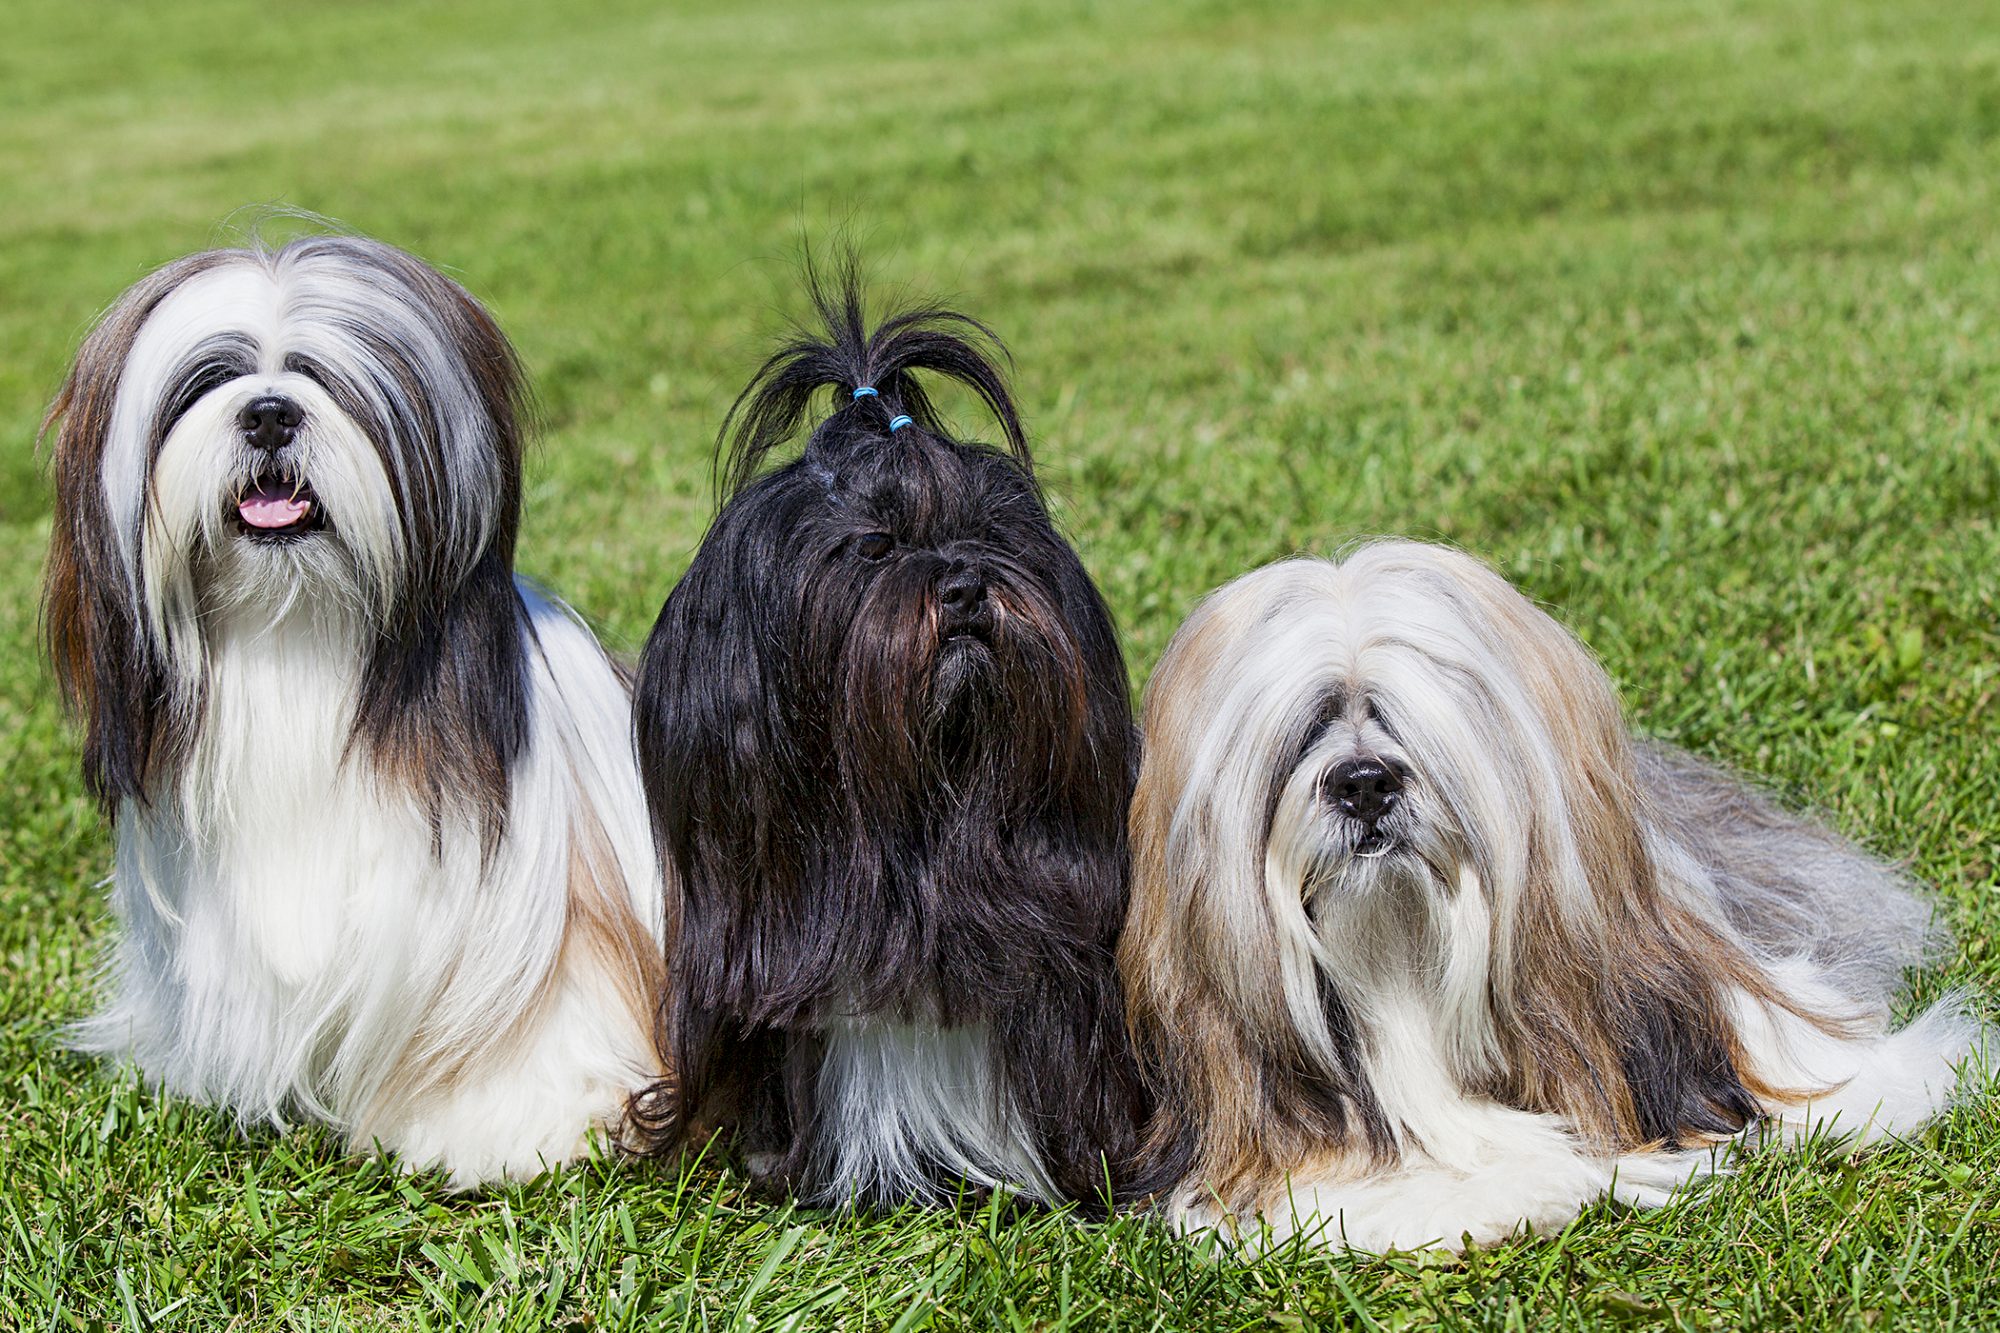 Are Lhasa Apso good for first time owners?